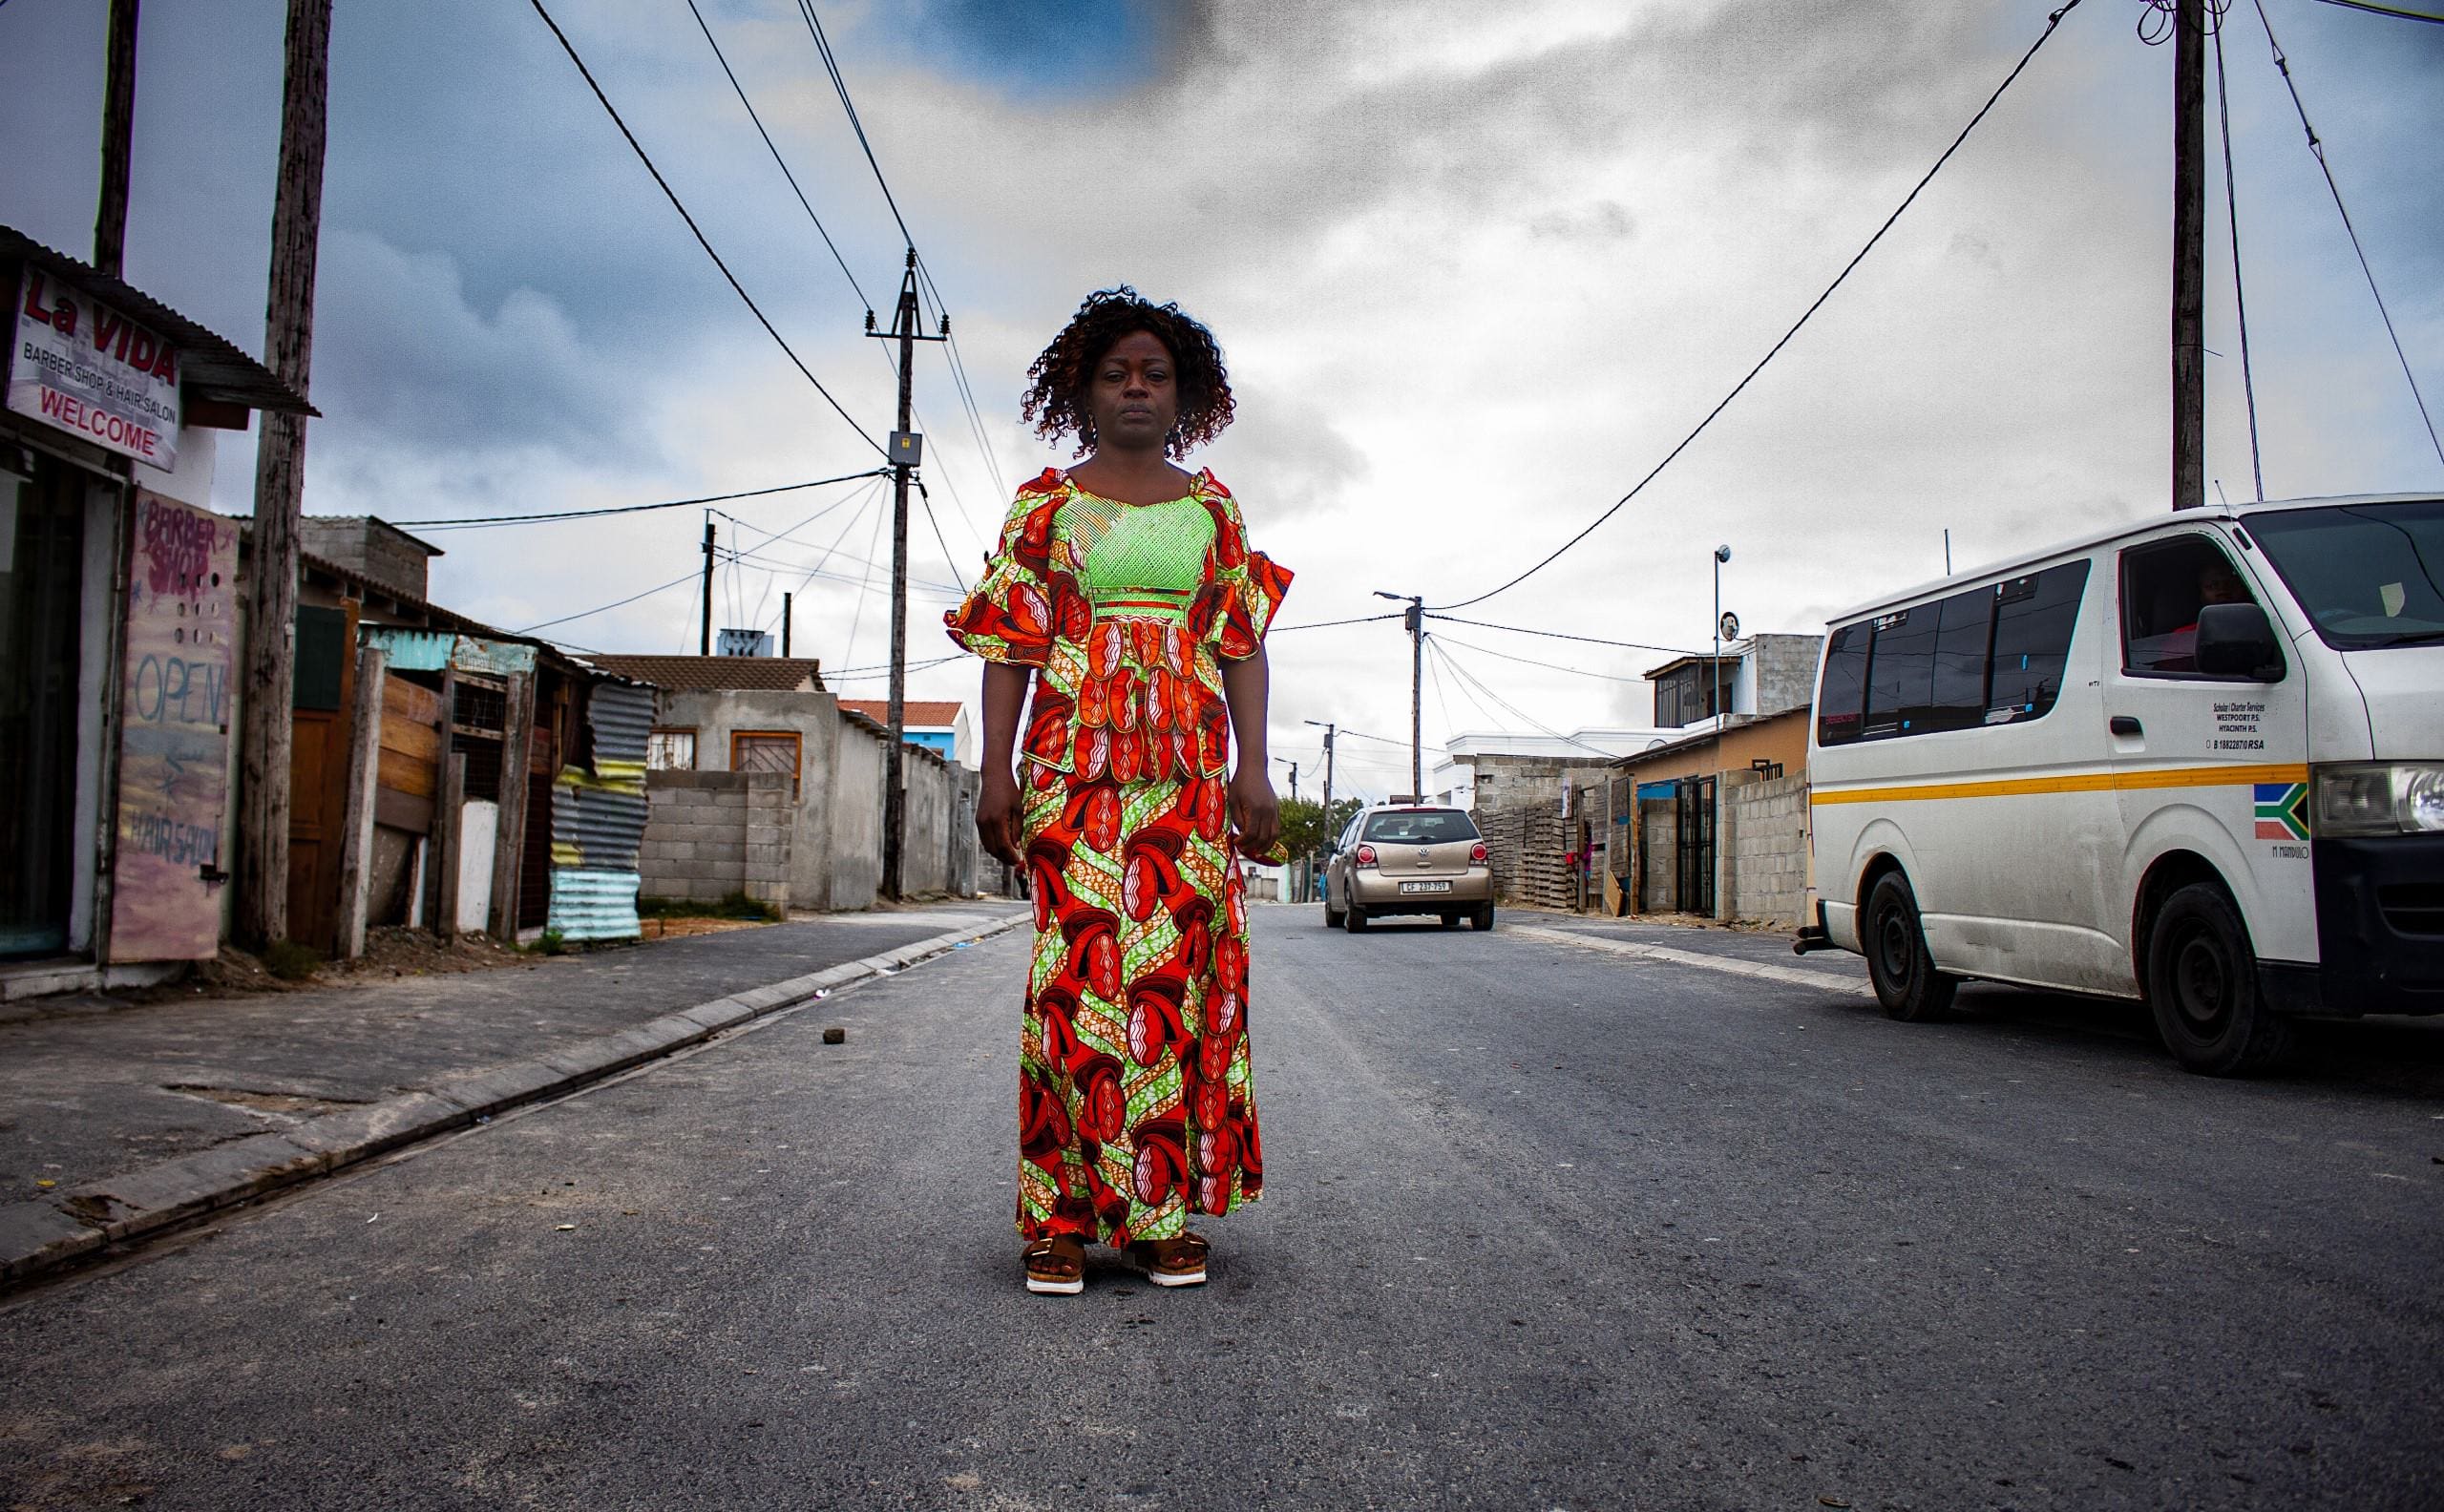 Therese in her neighbourhood, Delft, Cape Town. Suggested Credit Quentin Pichon/ Scalabrini